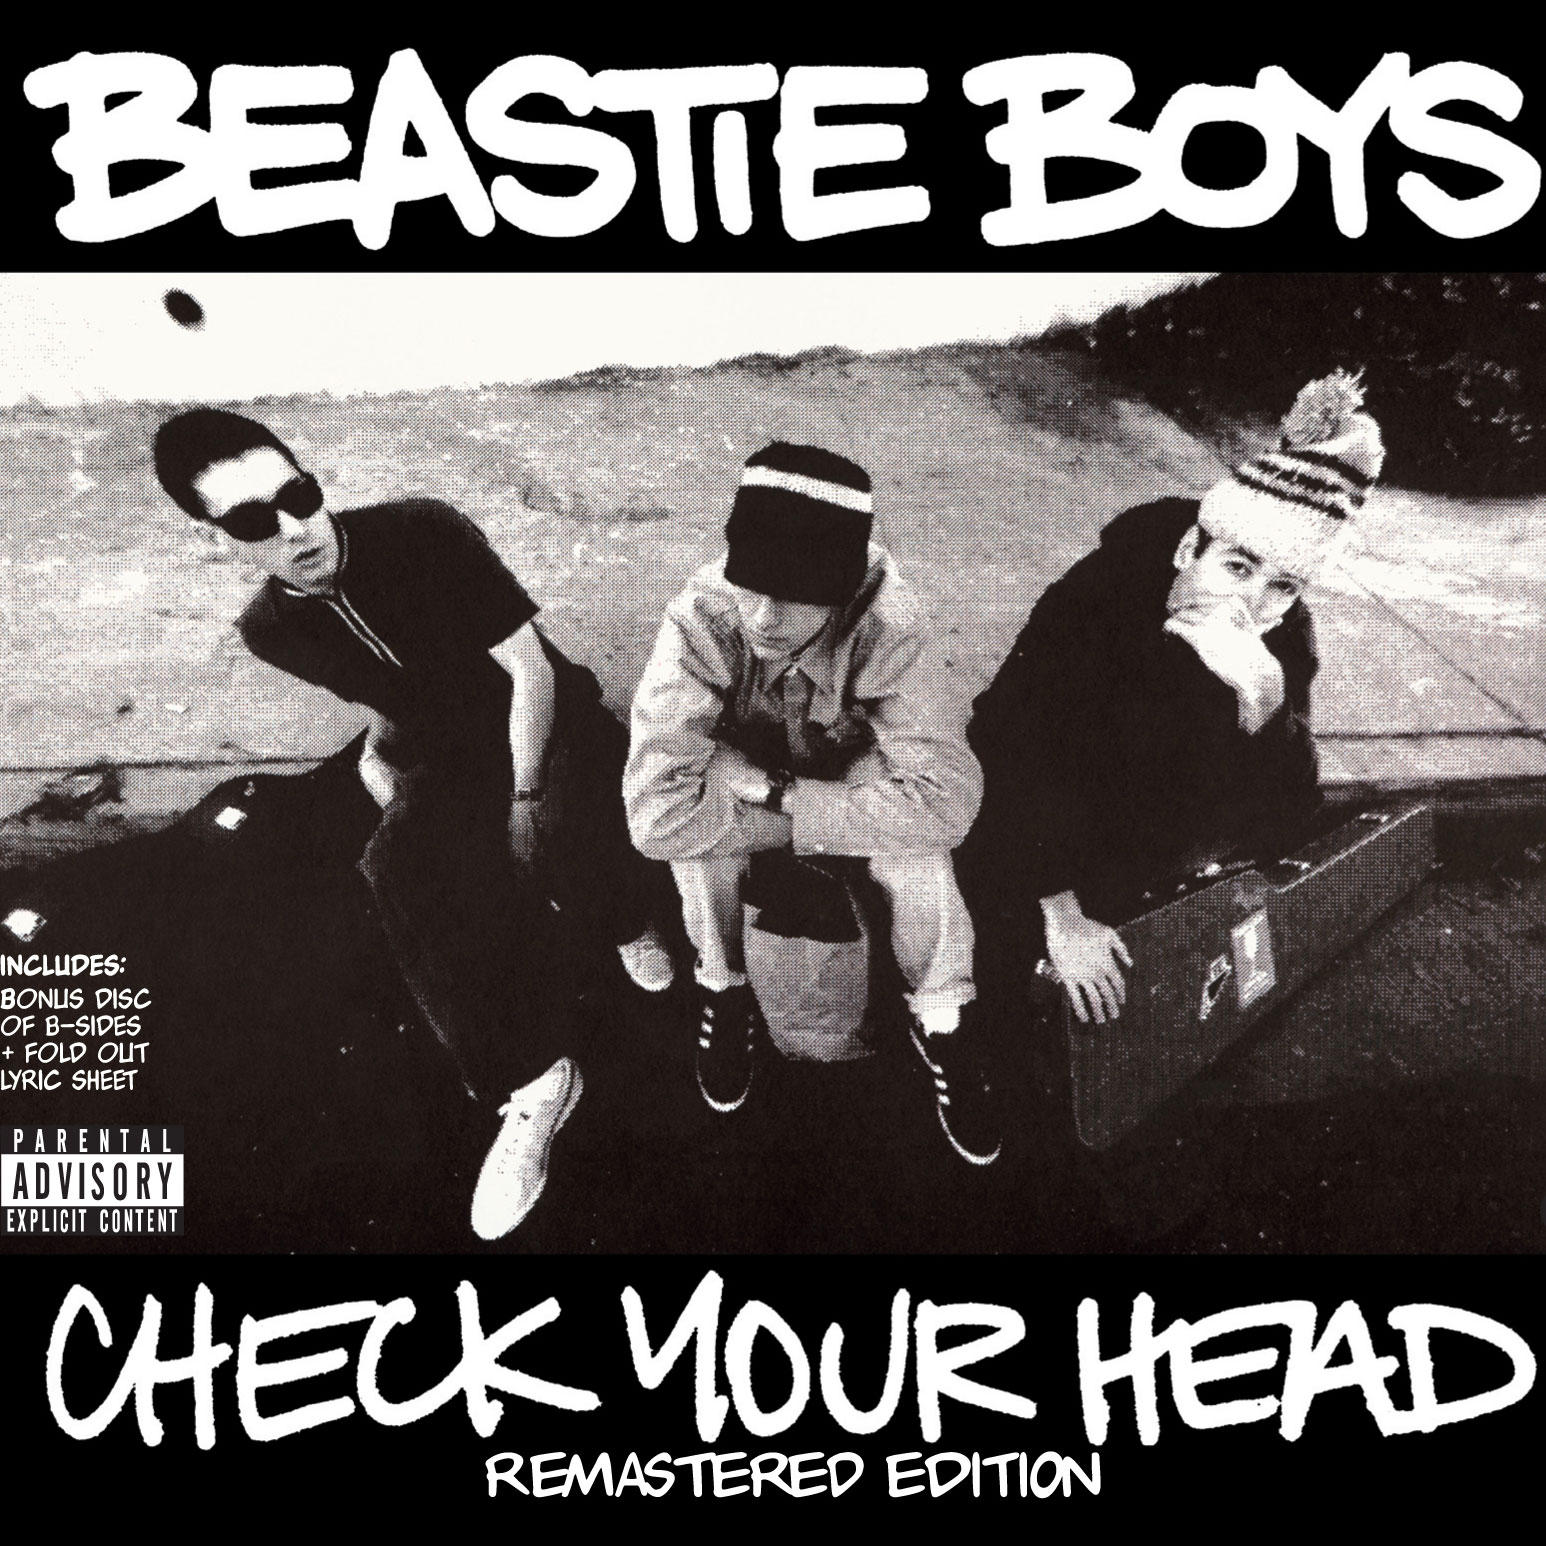 Beastie Boys: Check Your Head Remastered Edition